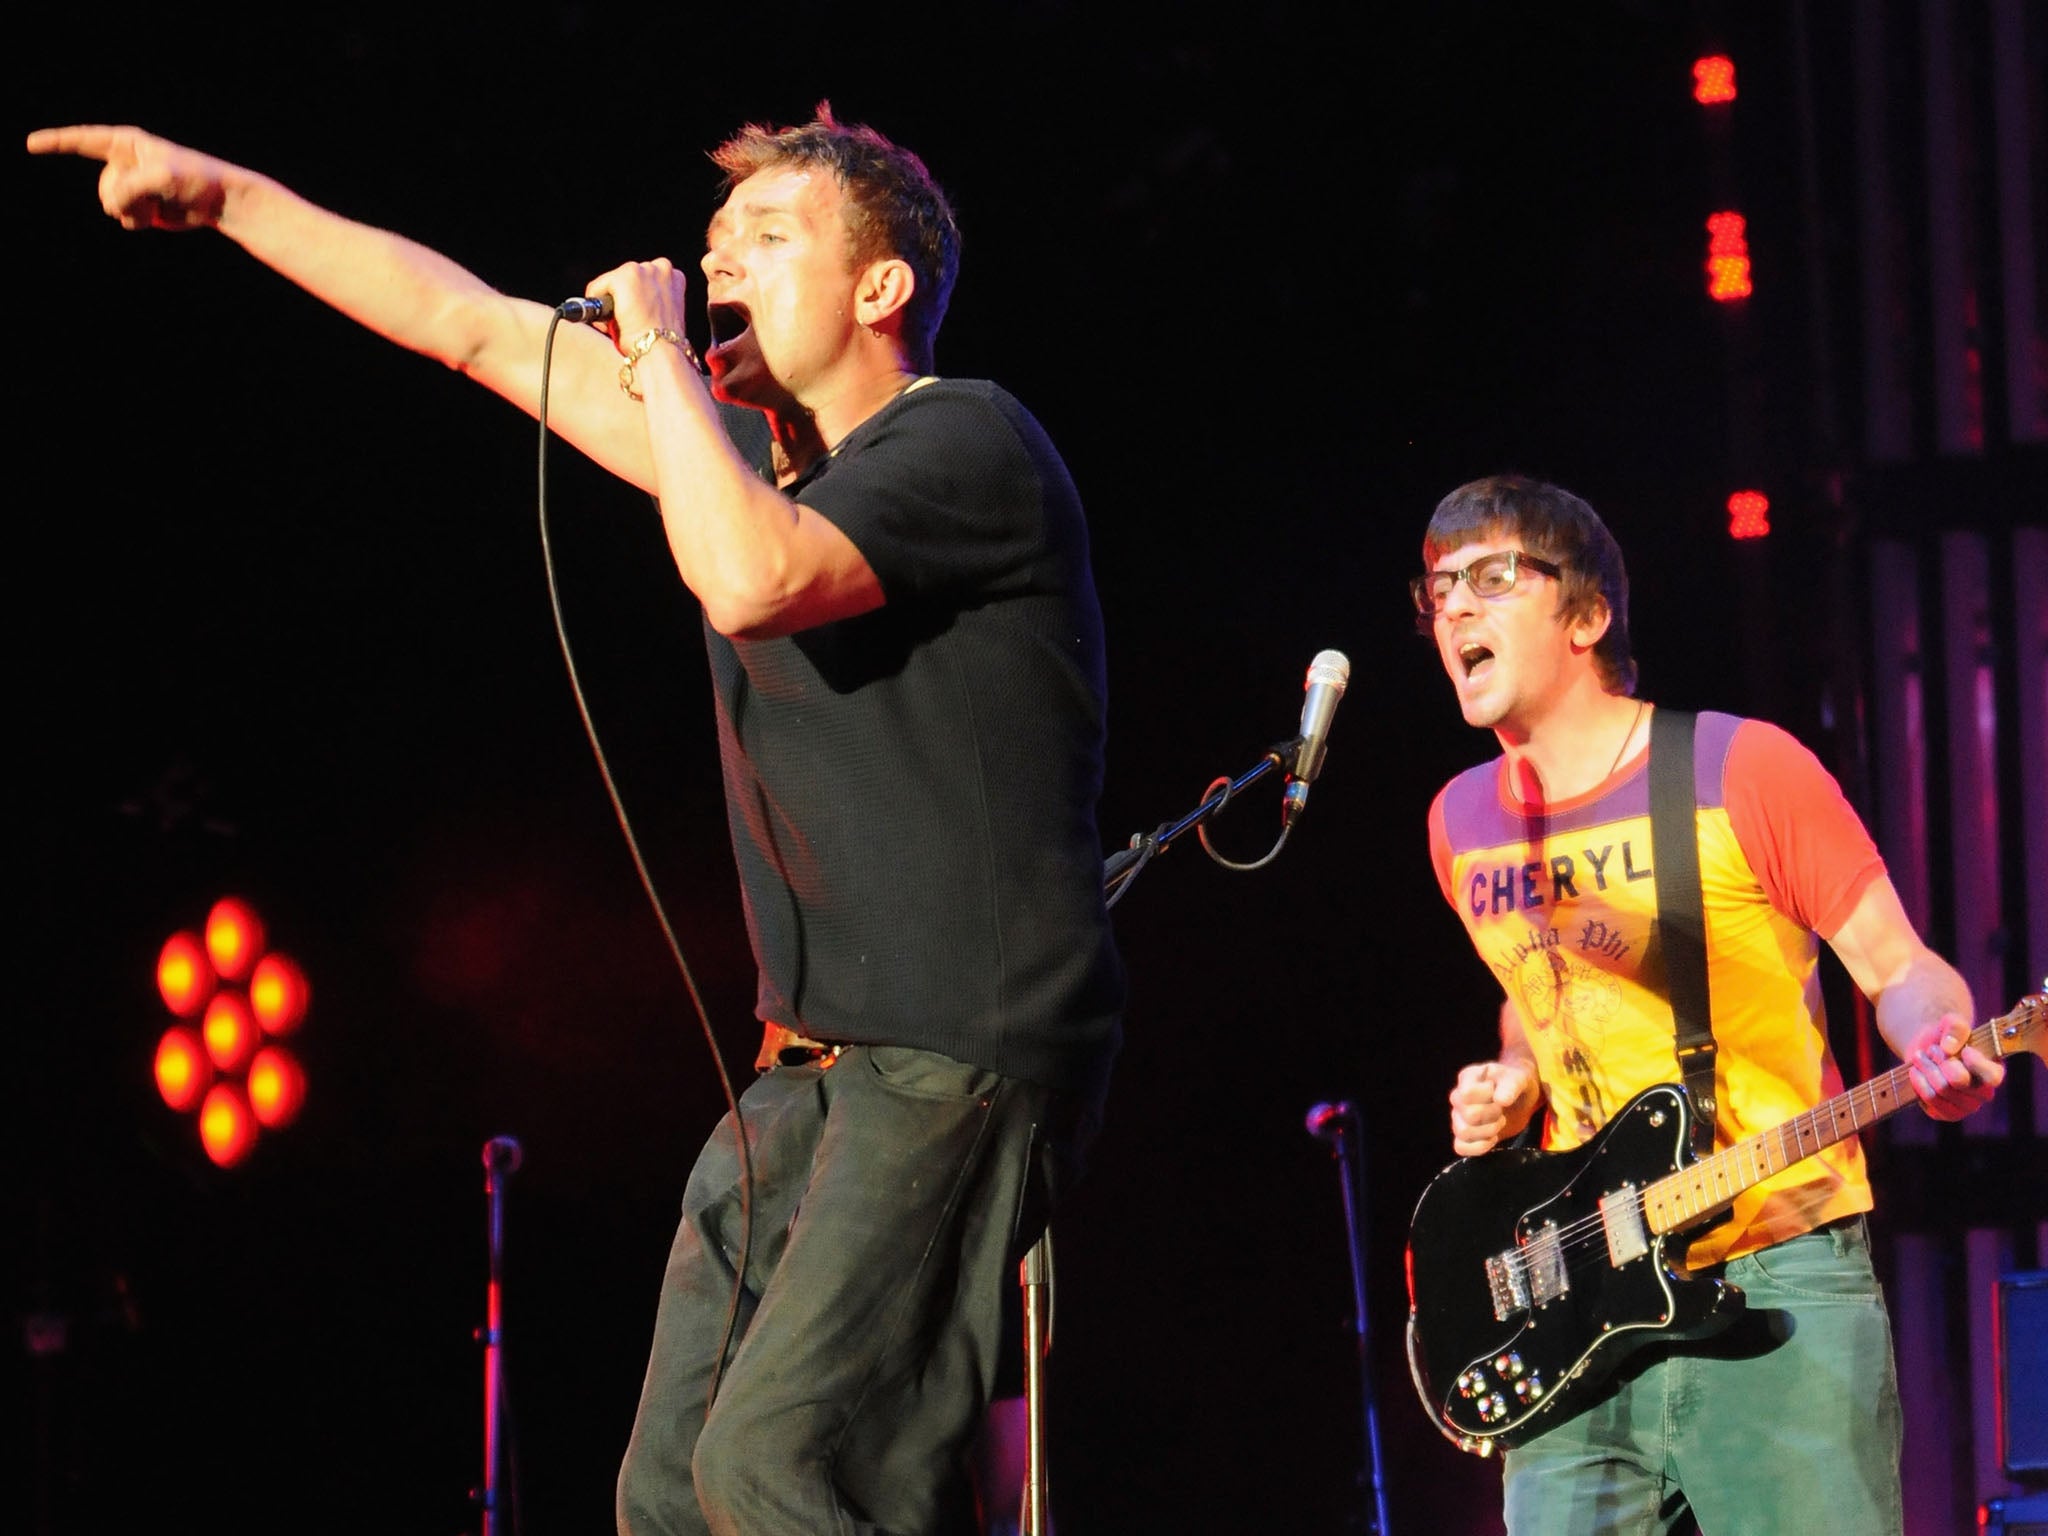 Blur’s Damon Albarn and Graham Coxon reunited for s series of concerts in 2009 after creative differences